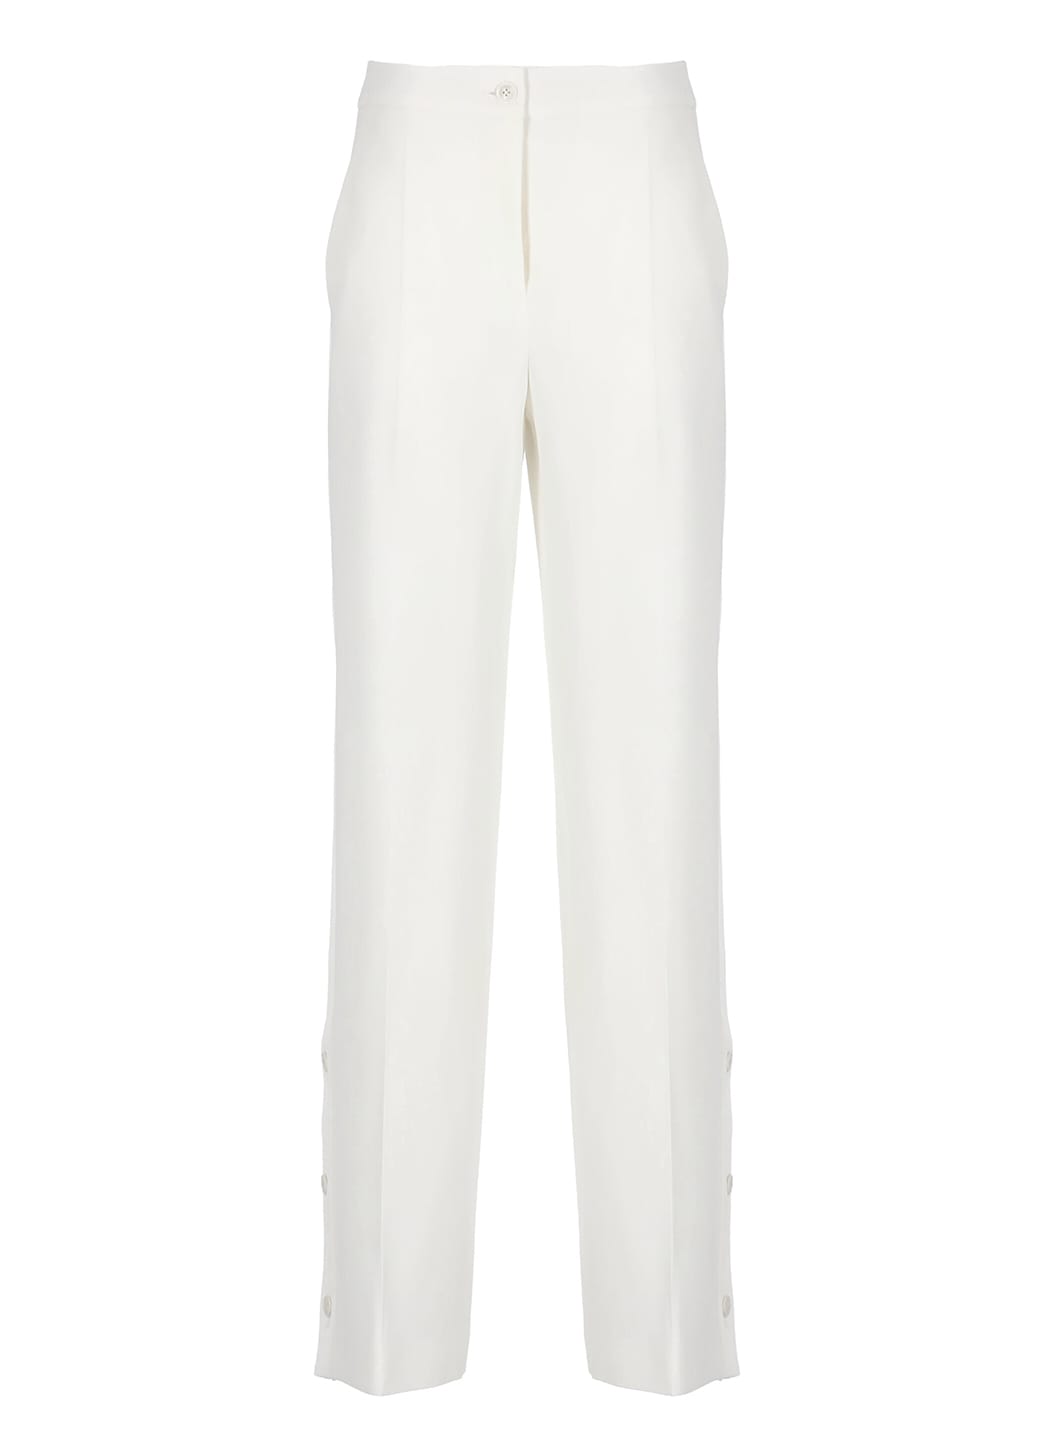 BOUTIQUE MOSCHINO SATIN TROUSERS